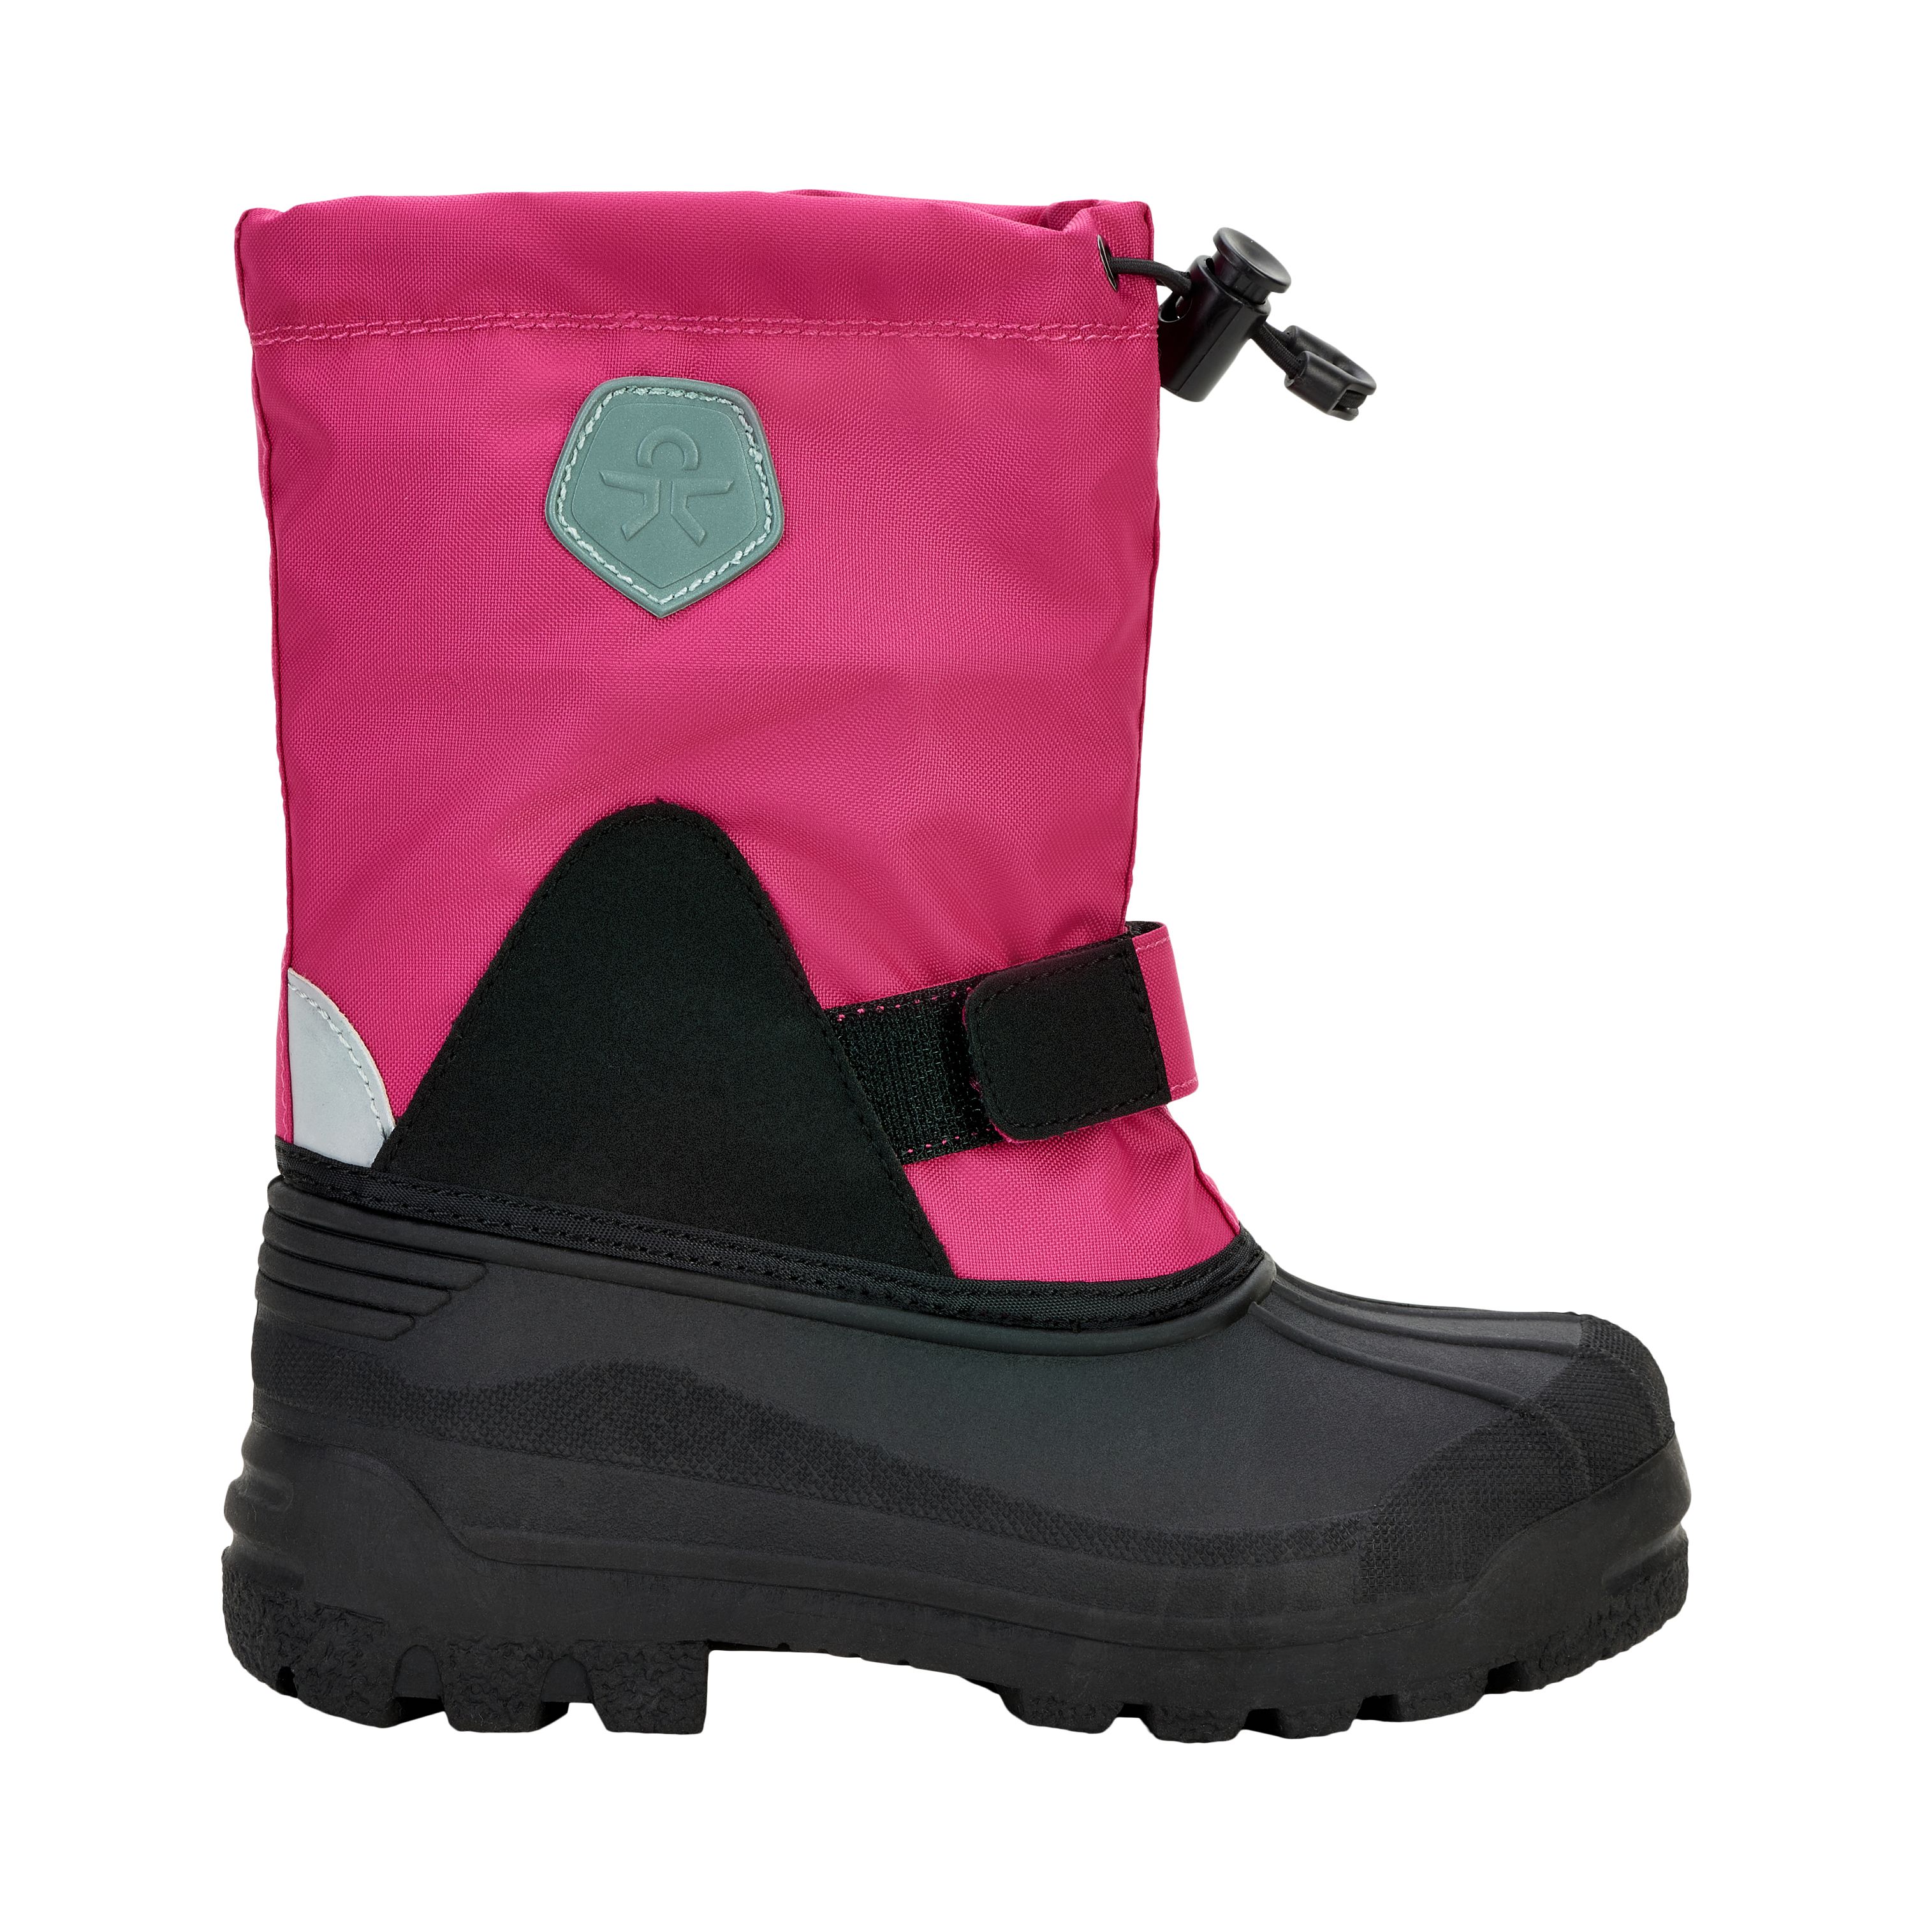 Boots w. inner sock, WP, pink peacock, size 35